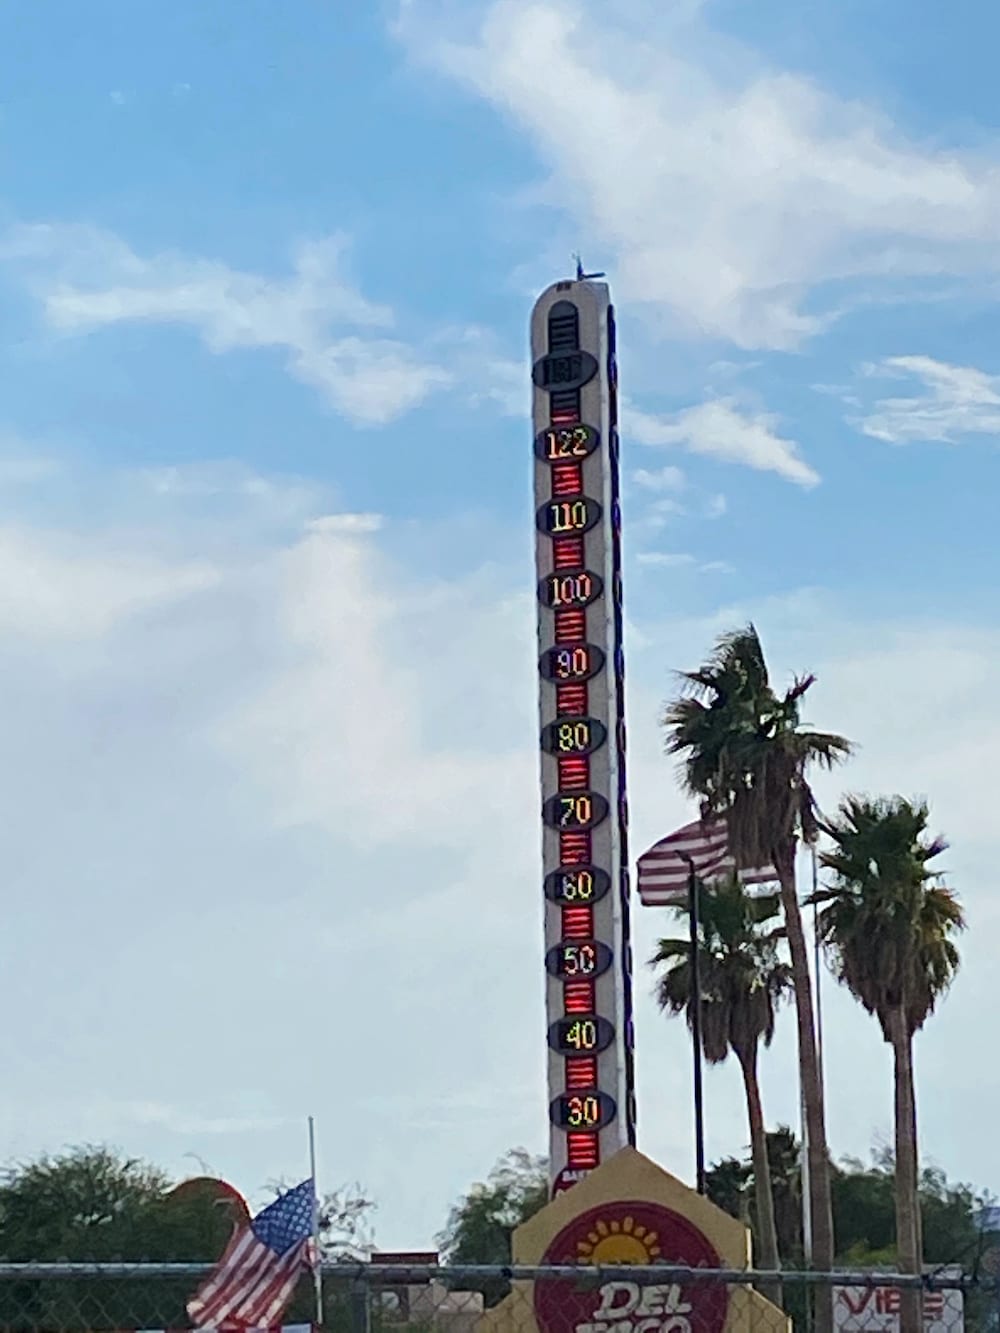 The World’s Tallest Thermometer shows the temperature, in Baker, California, U.S. August 15, 2020. Picture taken August 15, 2020. REUTERS/Dan Whitcomb REFILE - CORRECTING DATE